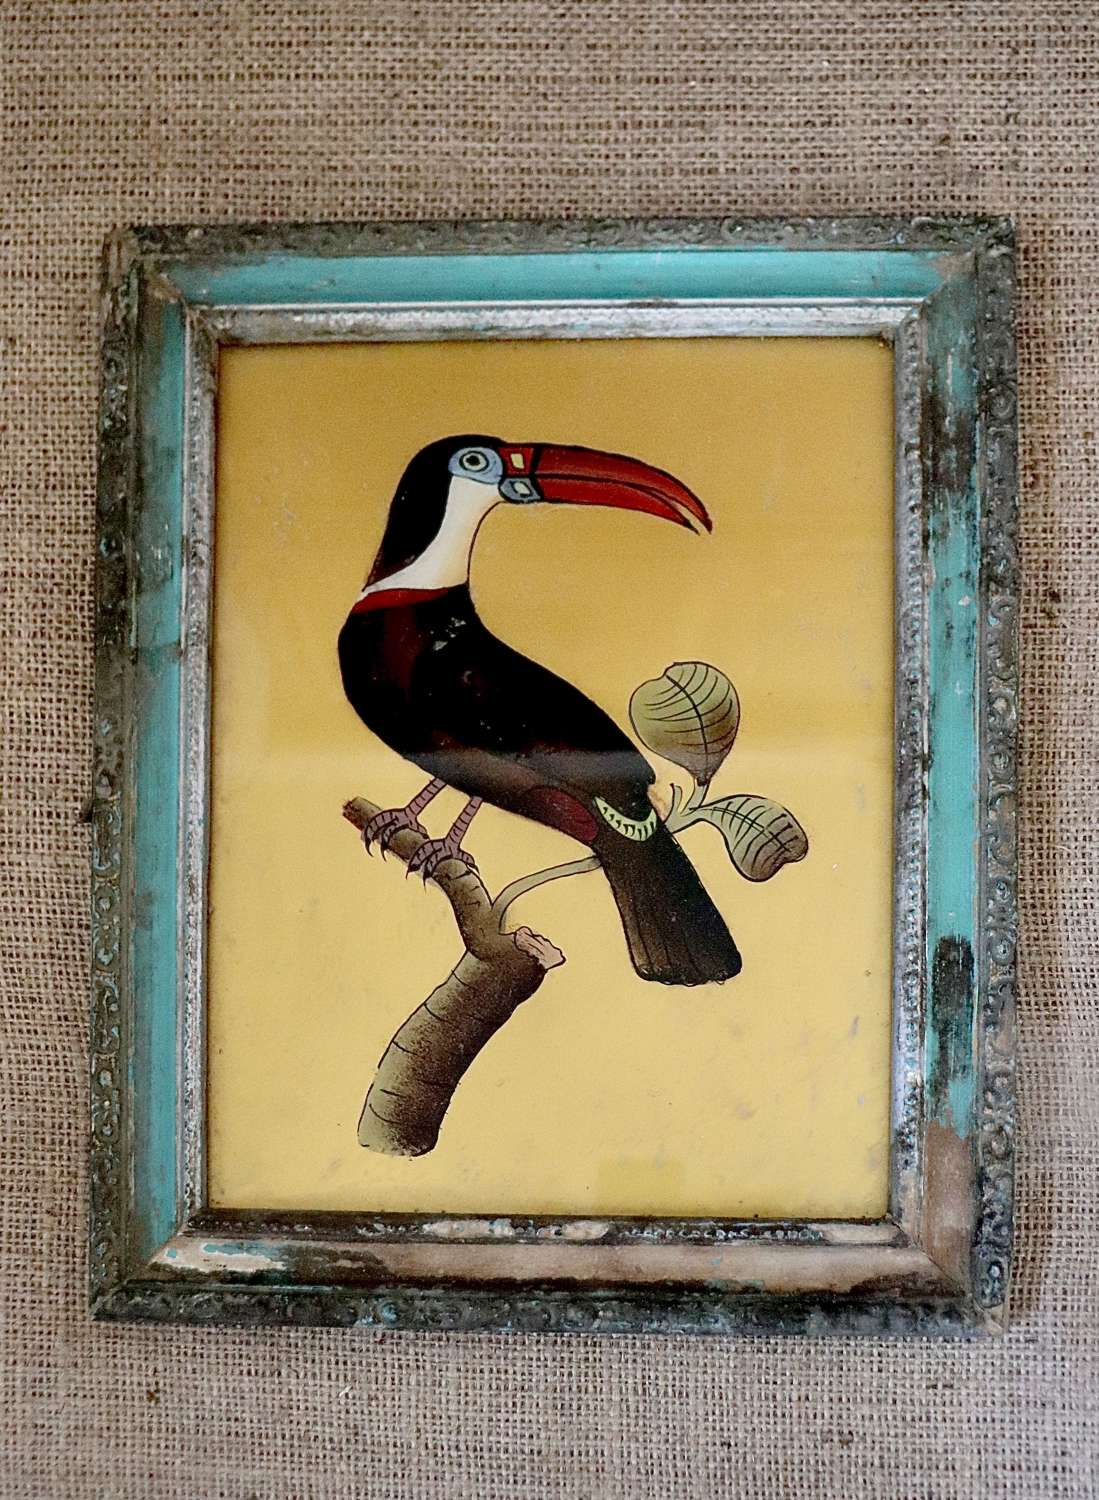 Indian reverse glass painting of a toucan